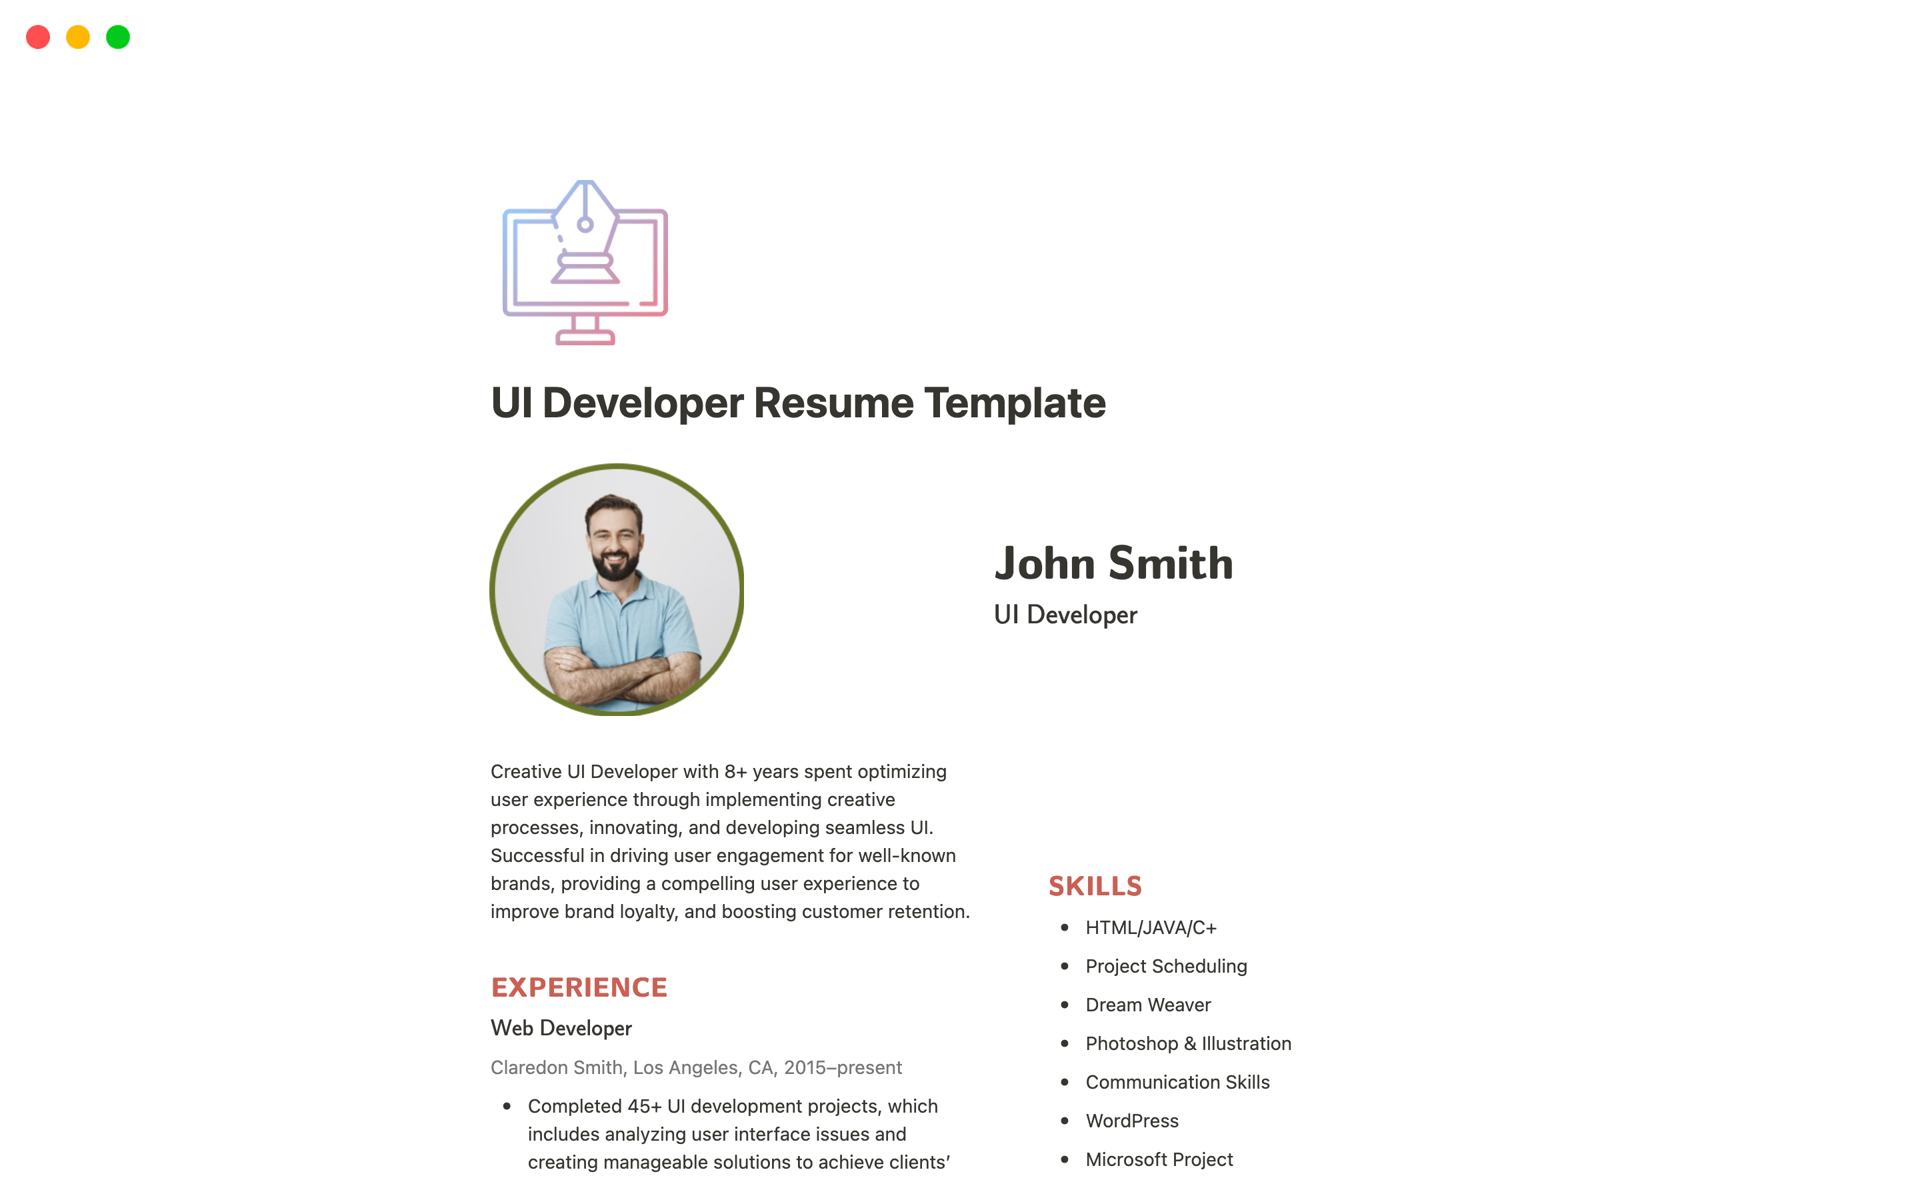 A template preview for UI Developer Resume